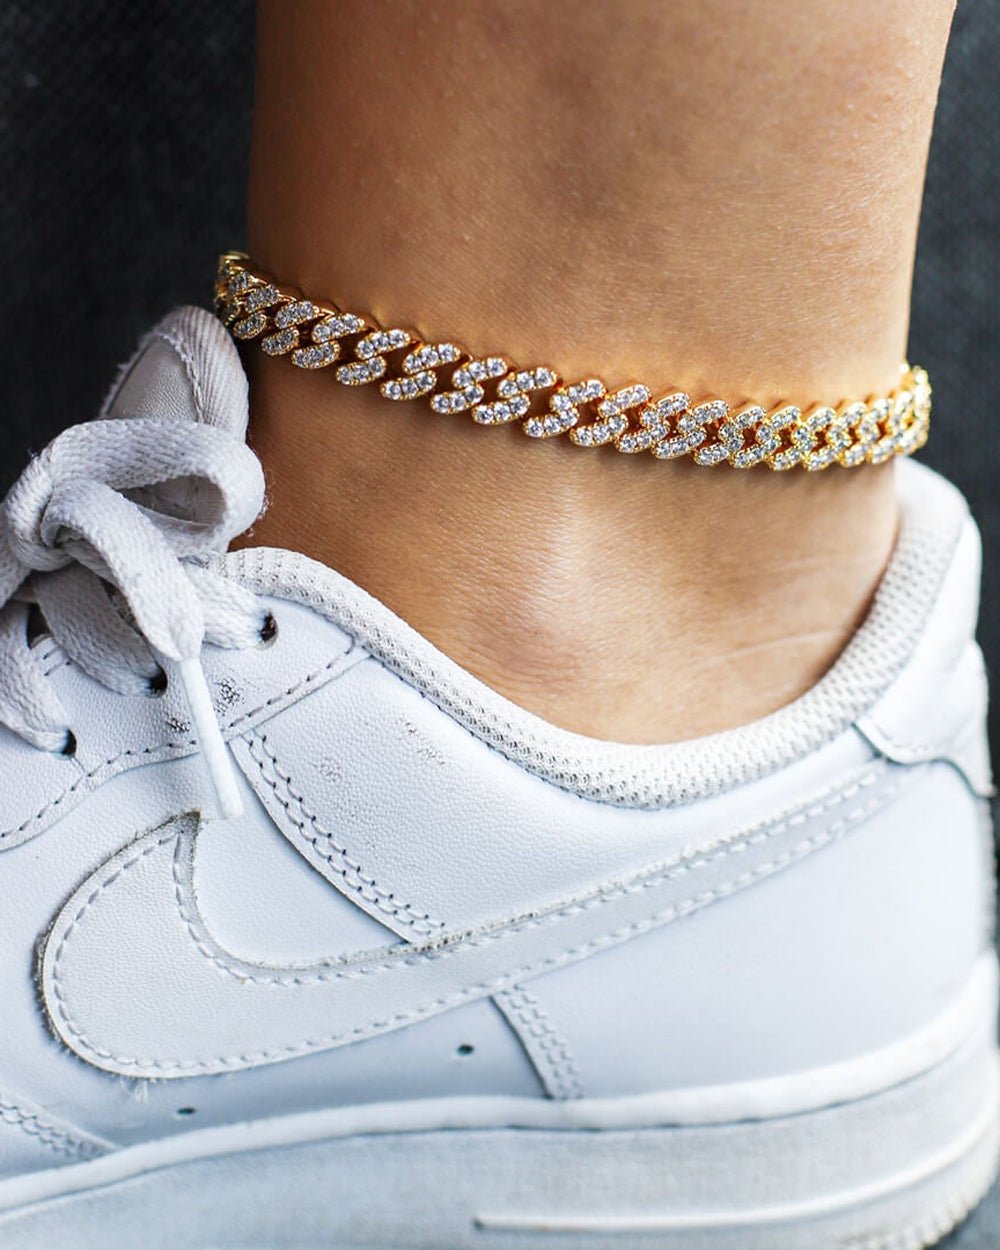 ICED CUBAN ANKLET. - 9MM 18K GOLD - Drippy Amsterdam